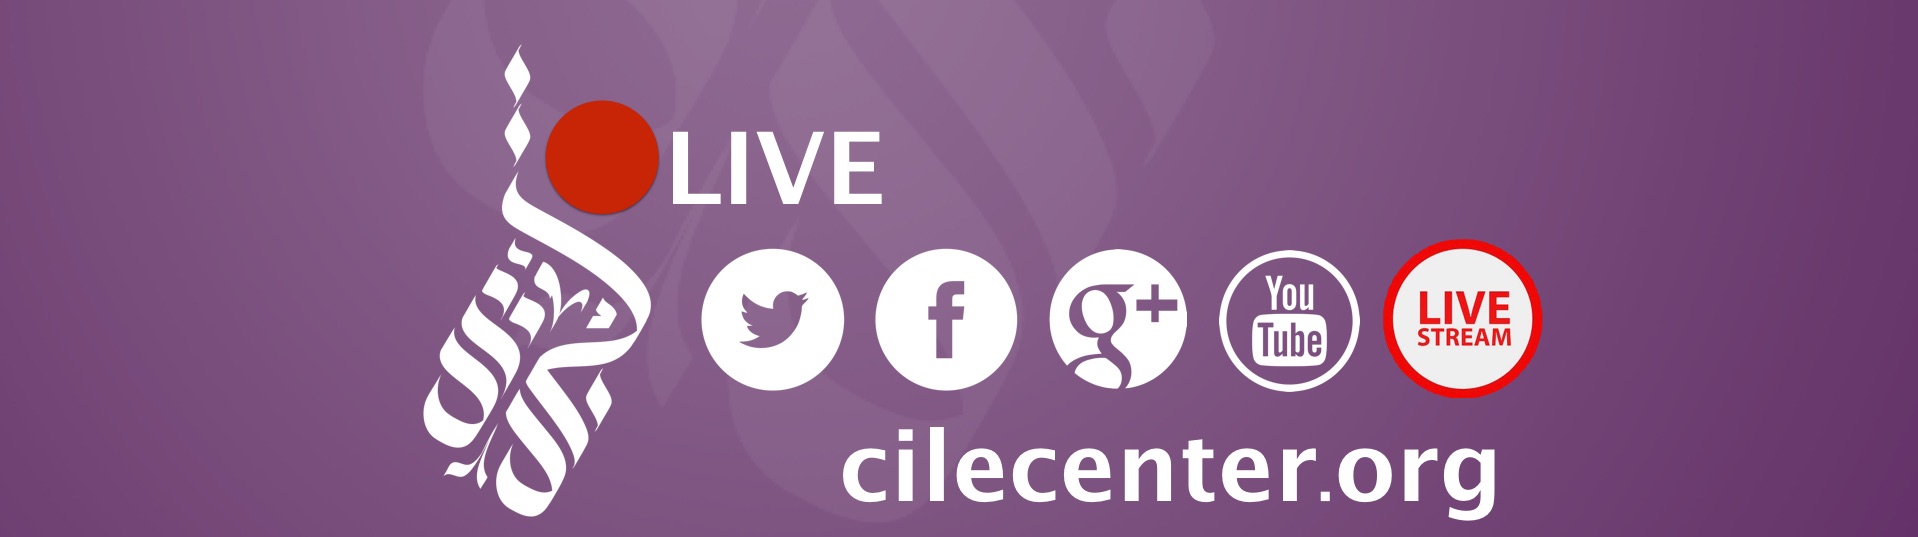 Follow #CILE2017 on Social Media and Watch the Livestream